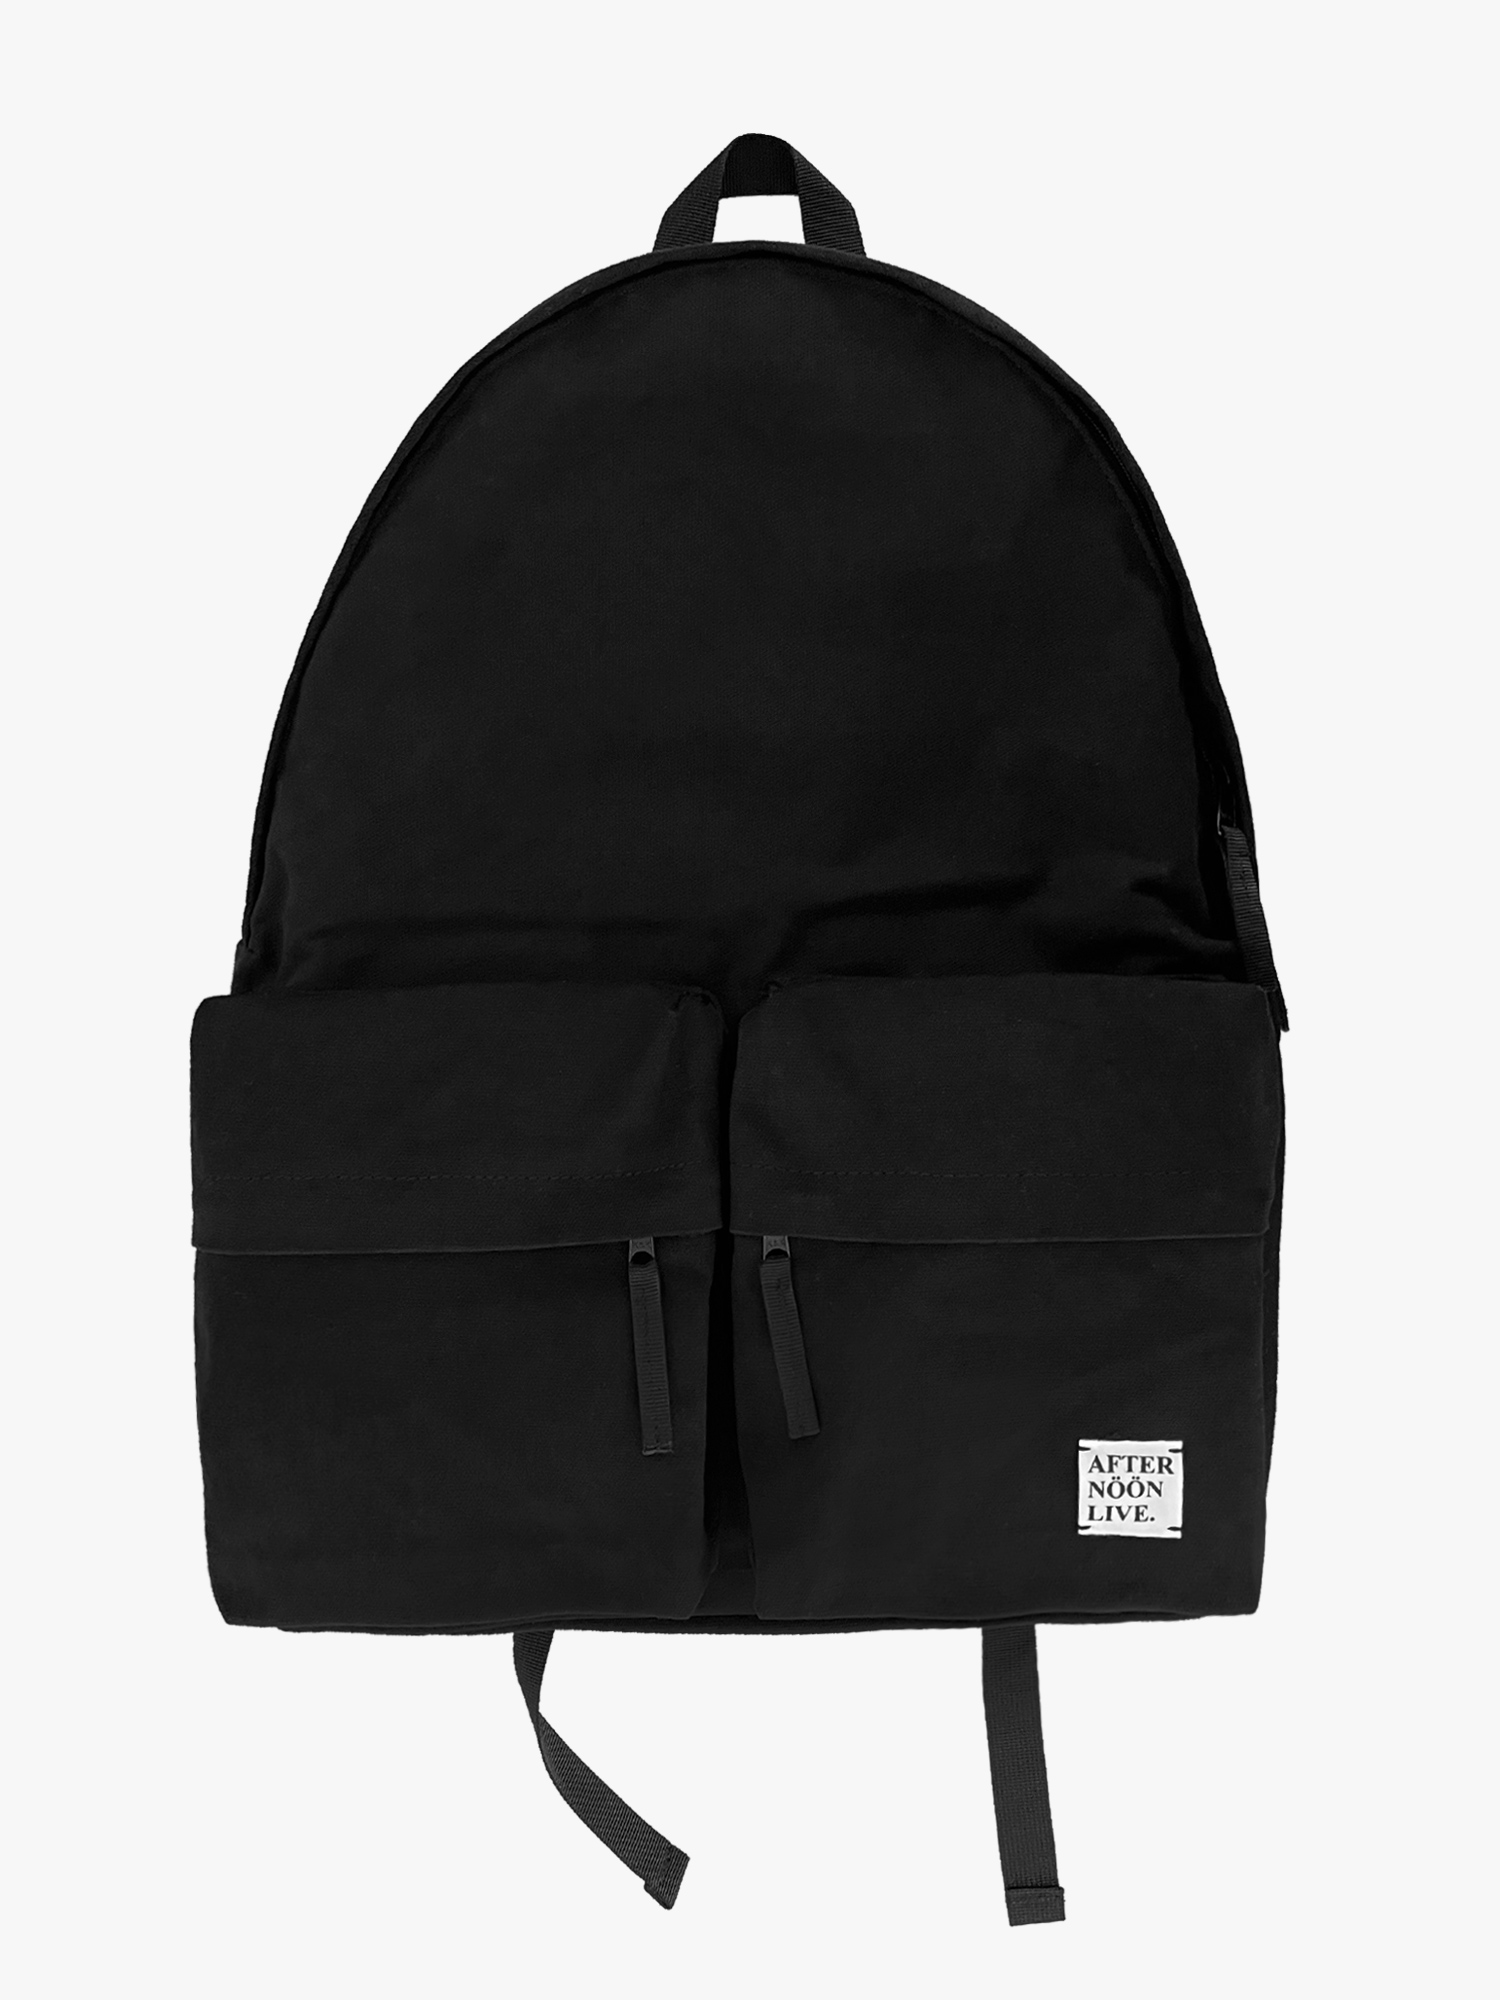 Afternoonlive Large Backpack (Pouch Set)